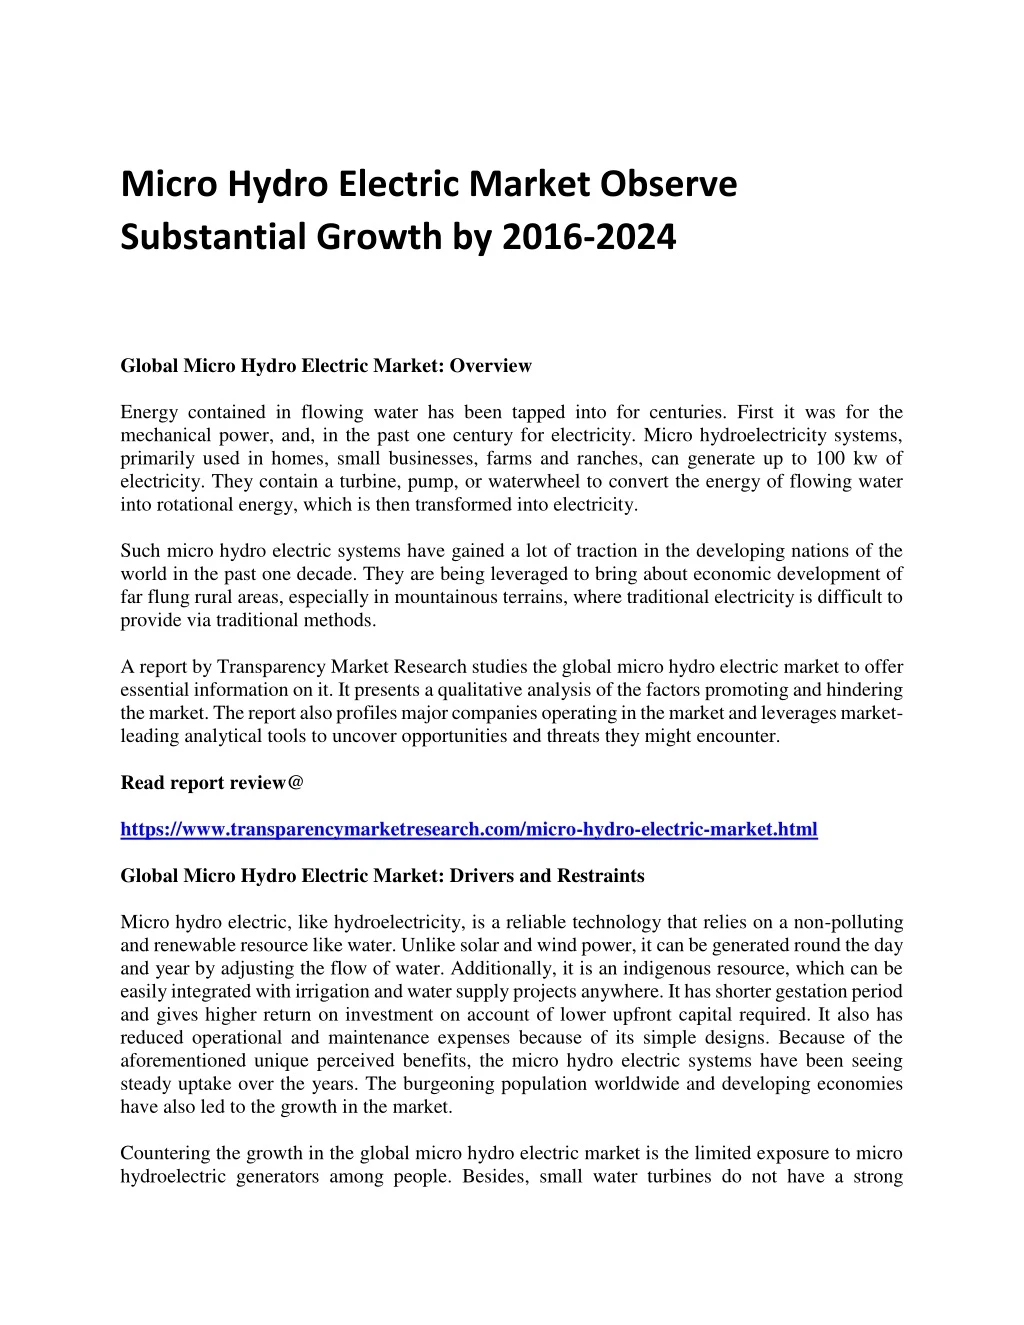 micro hydro electric market observe substantial